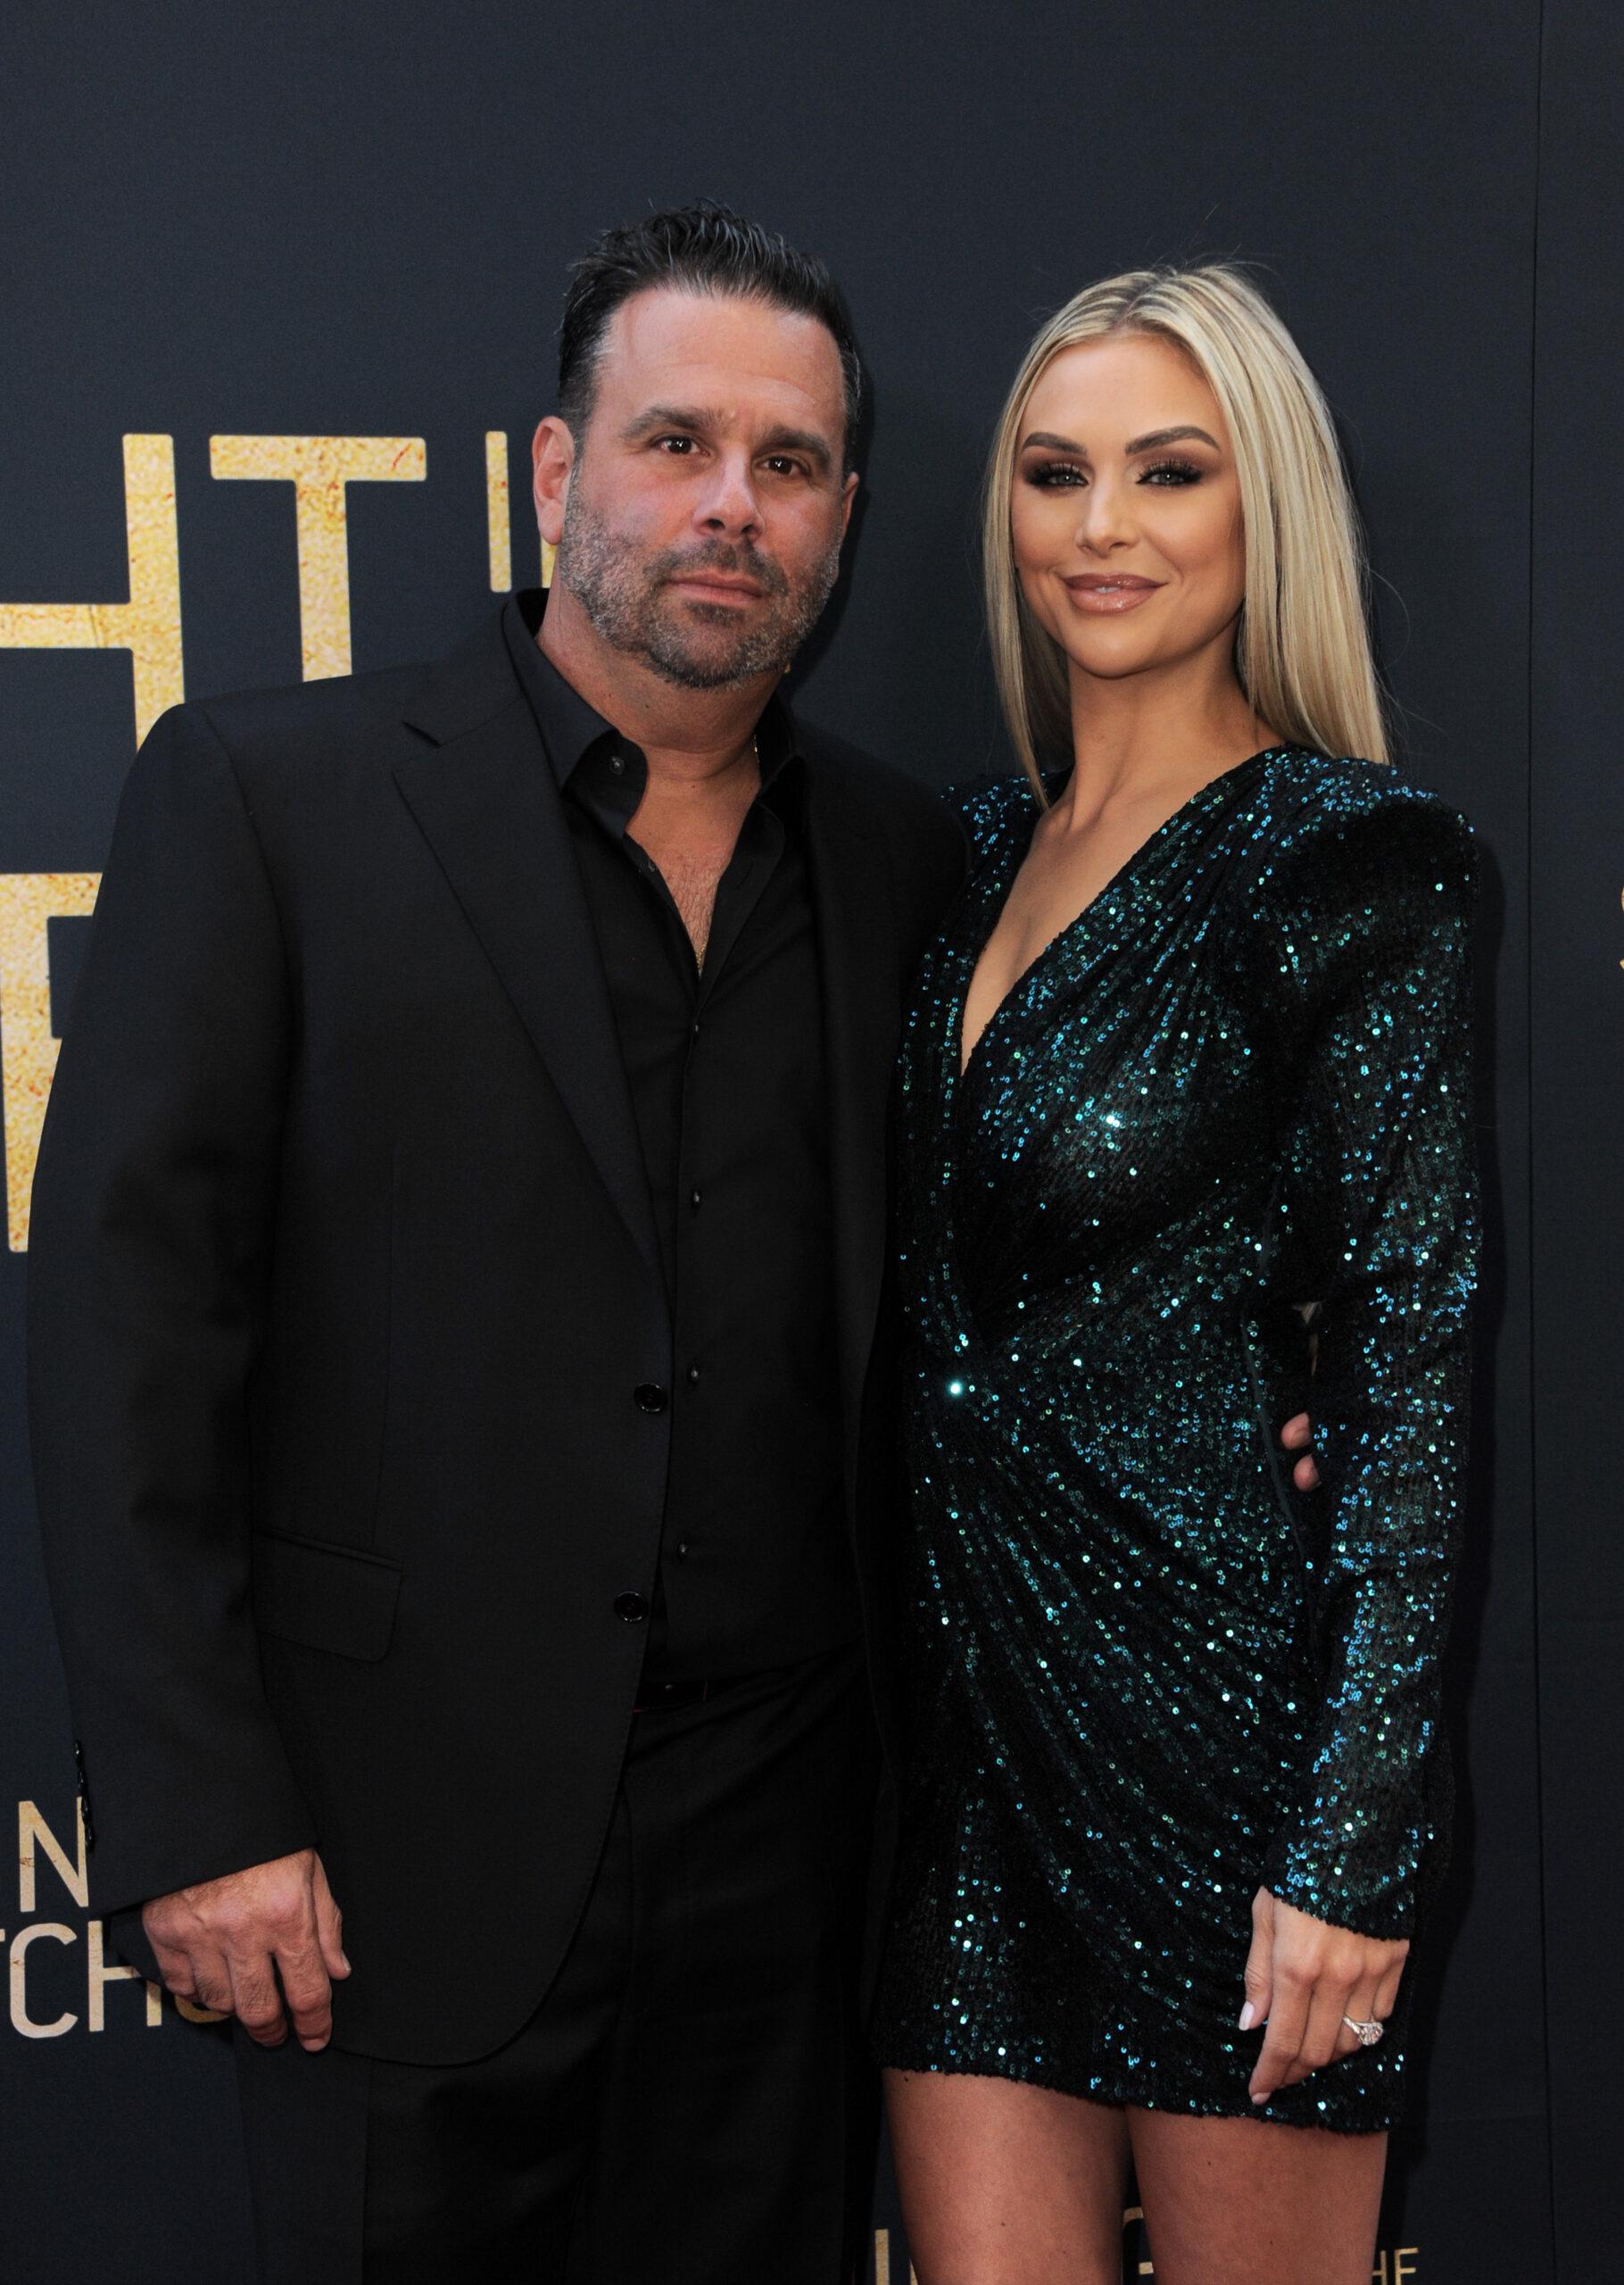 Randall Emmett and Lala Kent at Los Angeles special screening of 'Midnight In The Switchgrass'